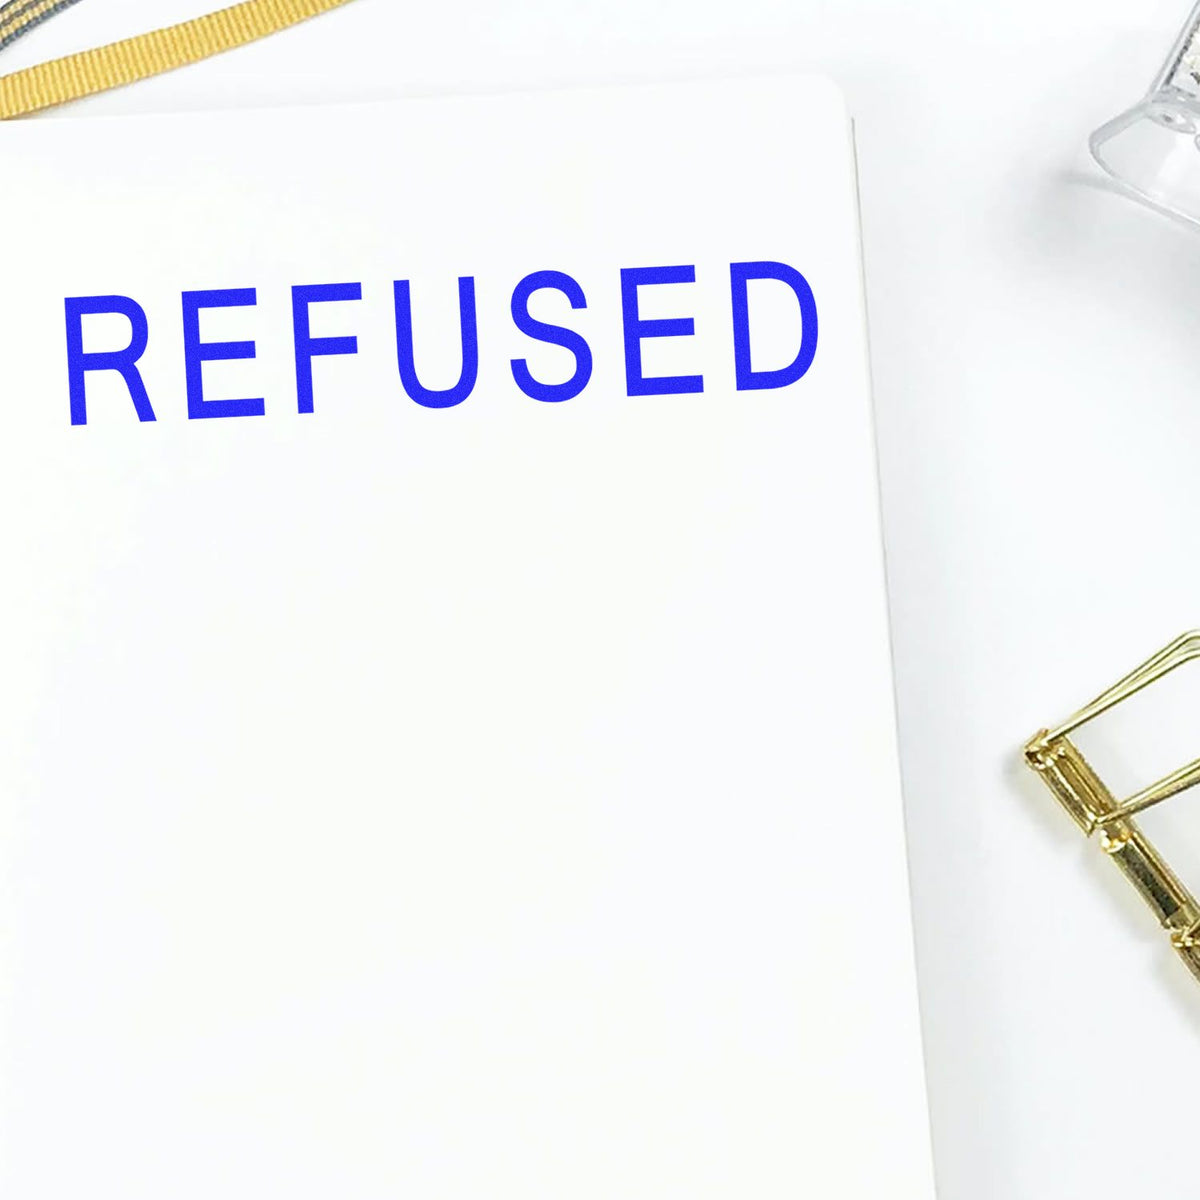 Refused Rubber Stamp In Use Photo